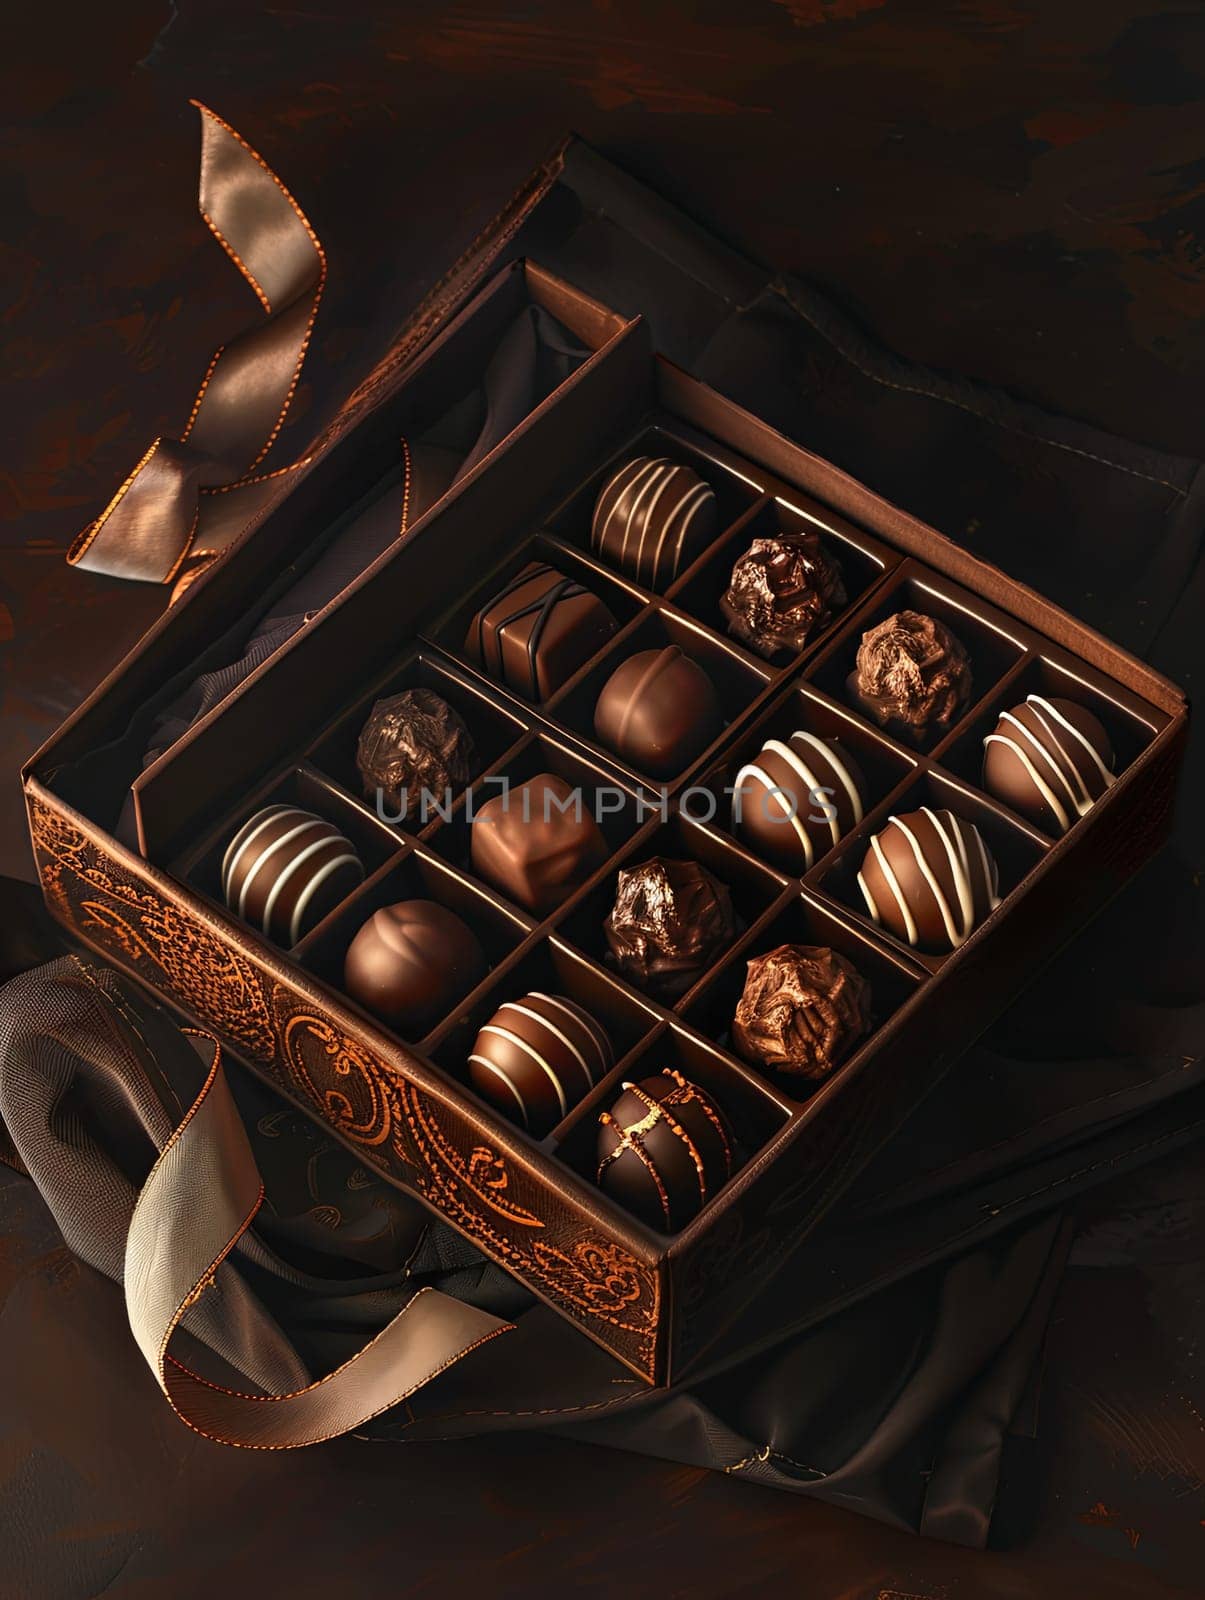 A detailed painting of an elegant box of chocolates on a table, showcasing luxurious presentation with ribbons and rich dark colors.